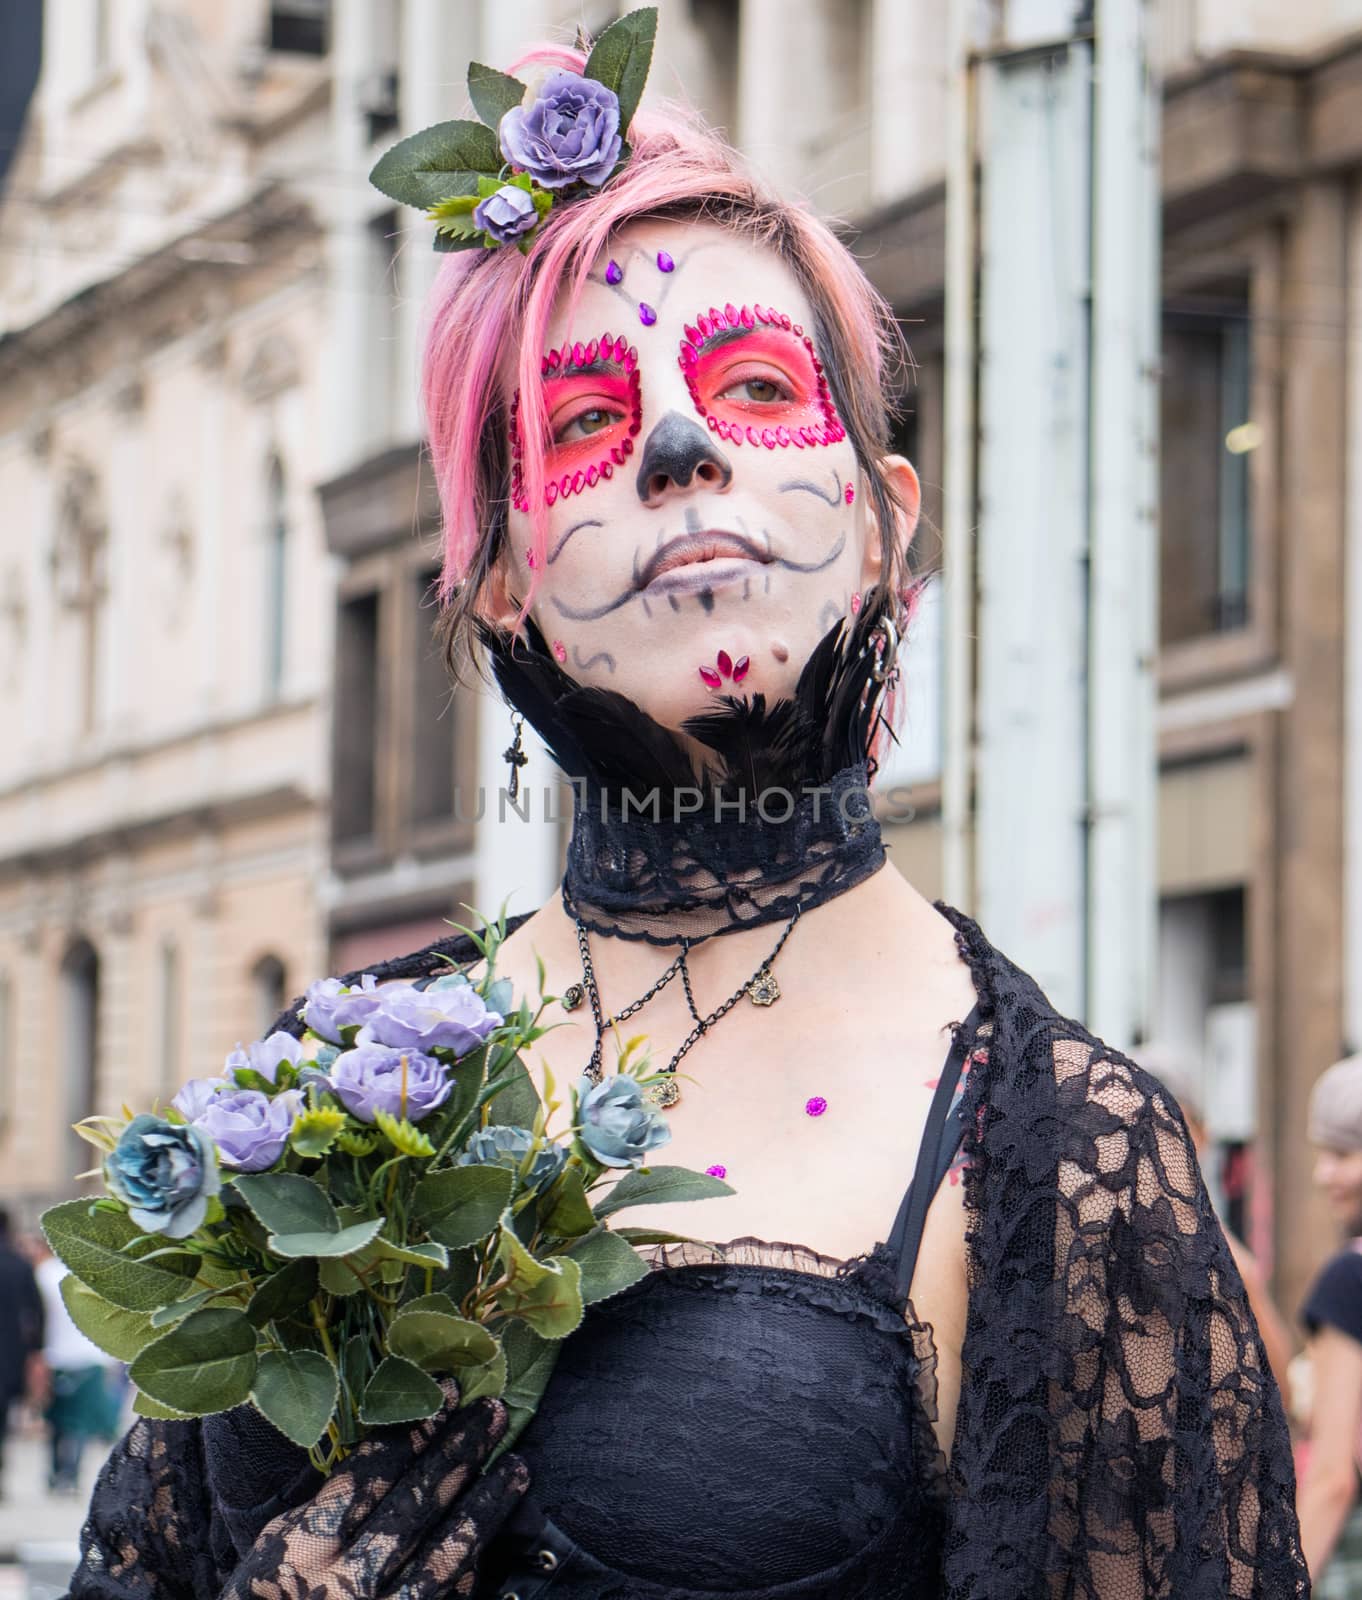 Sao Paulo, Brazil November 11 2015: An unidentified girl in traditional costumes in the annual event Zombie Walk in Sao Paulo Brazil.